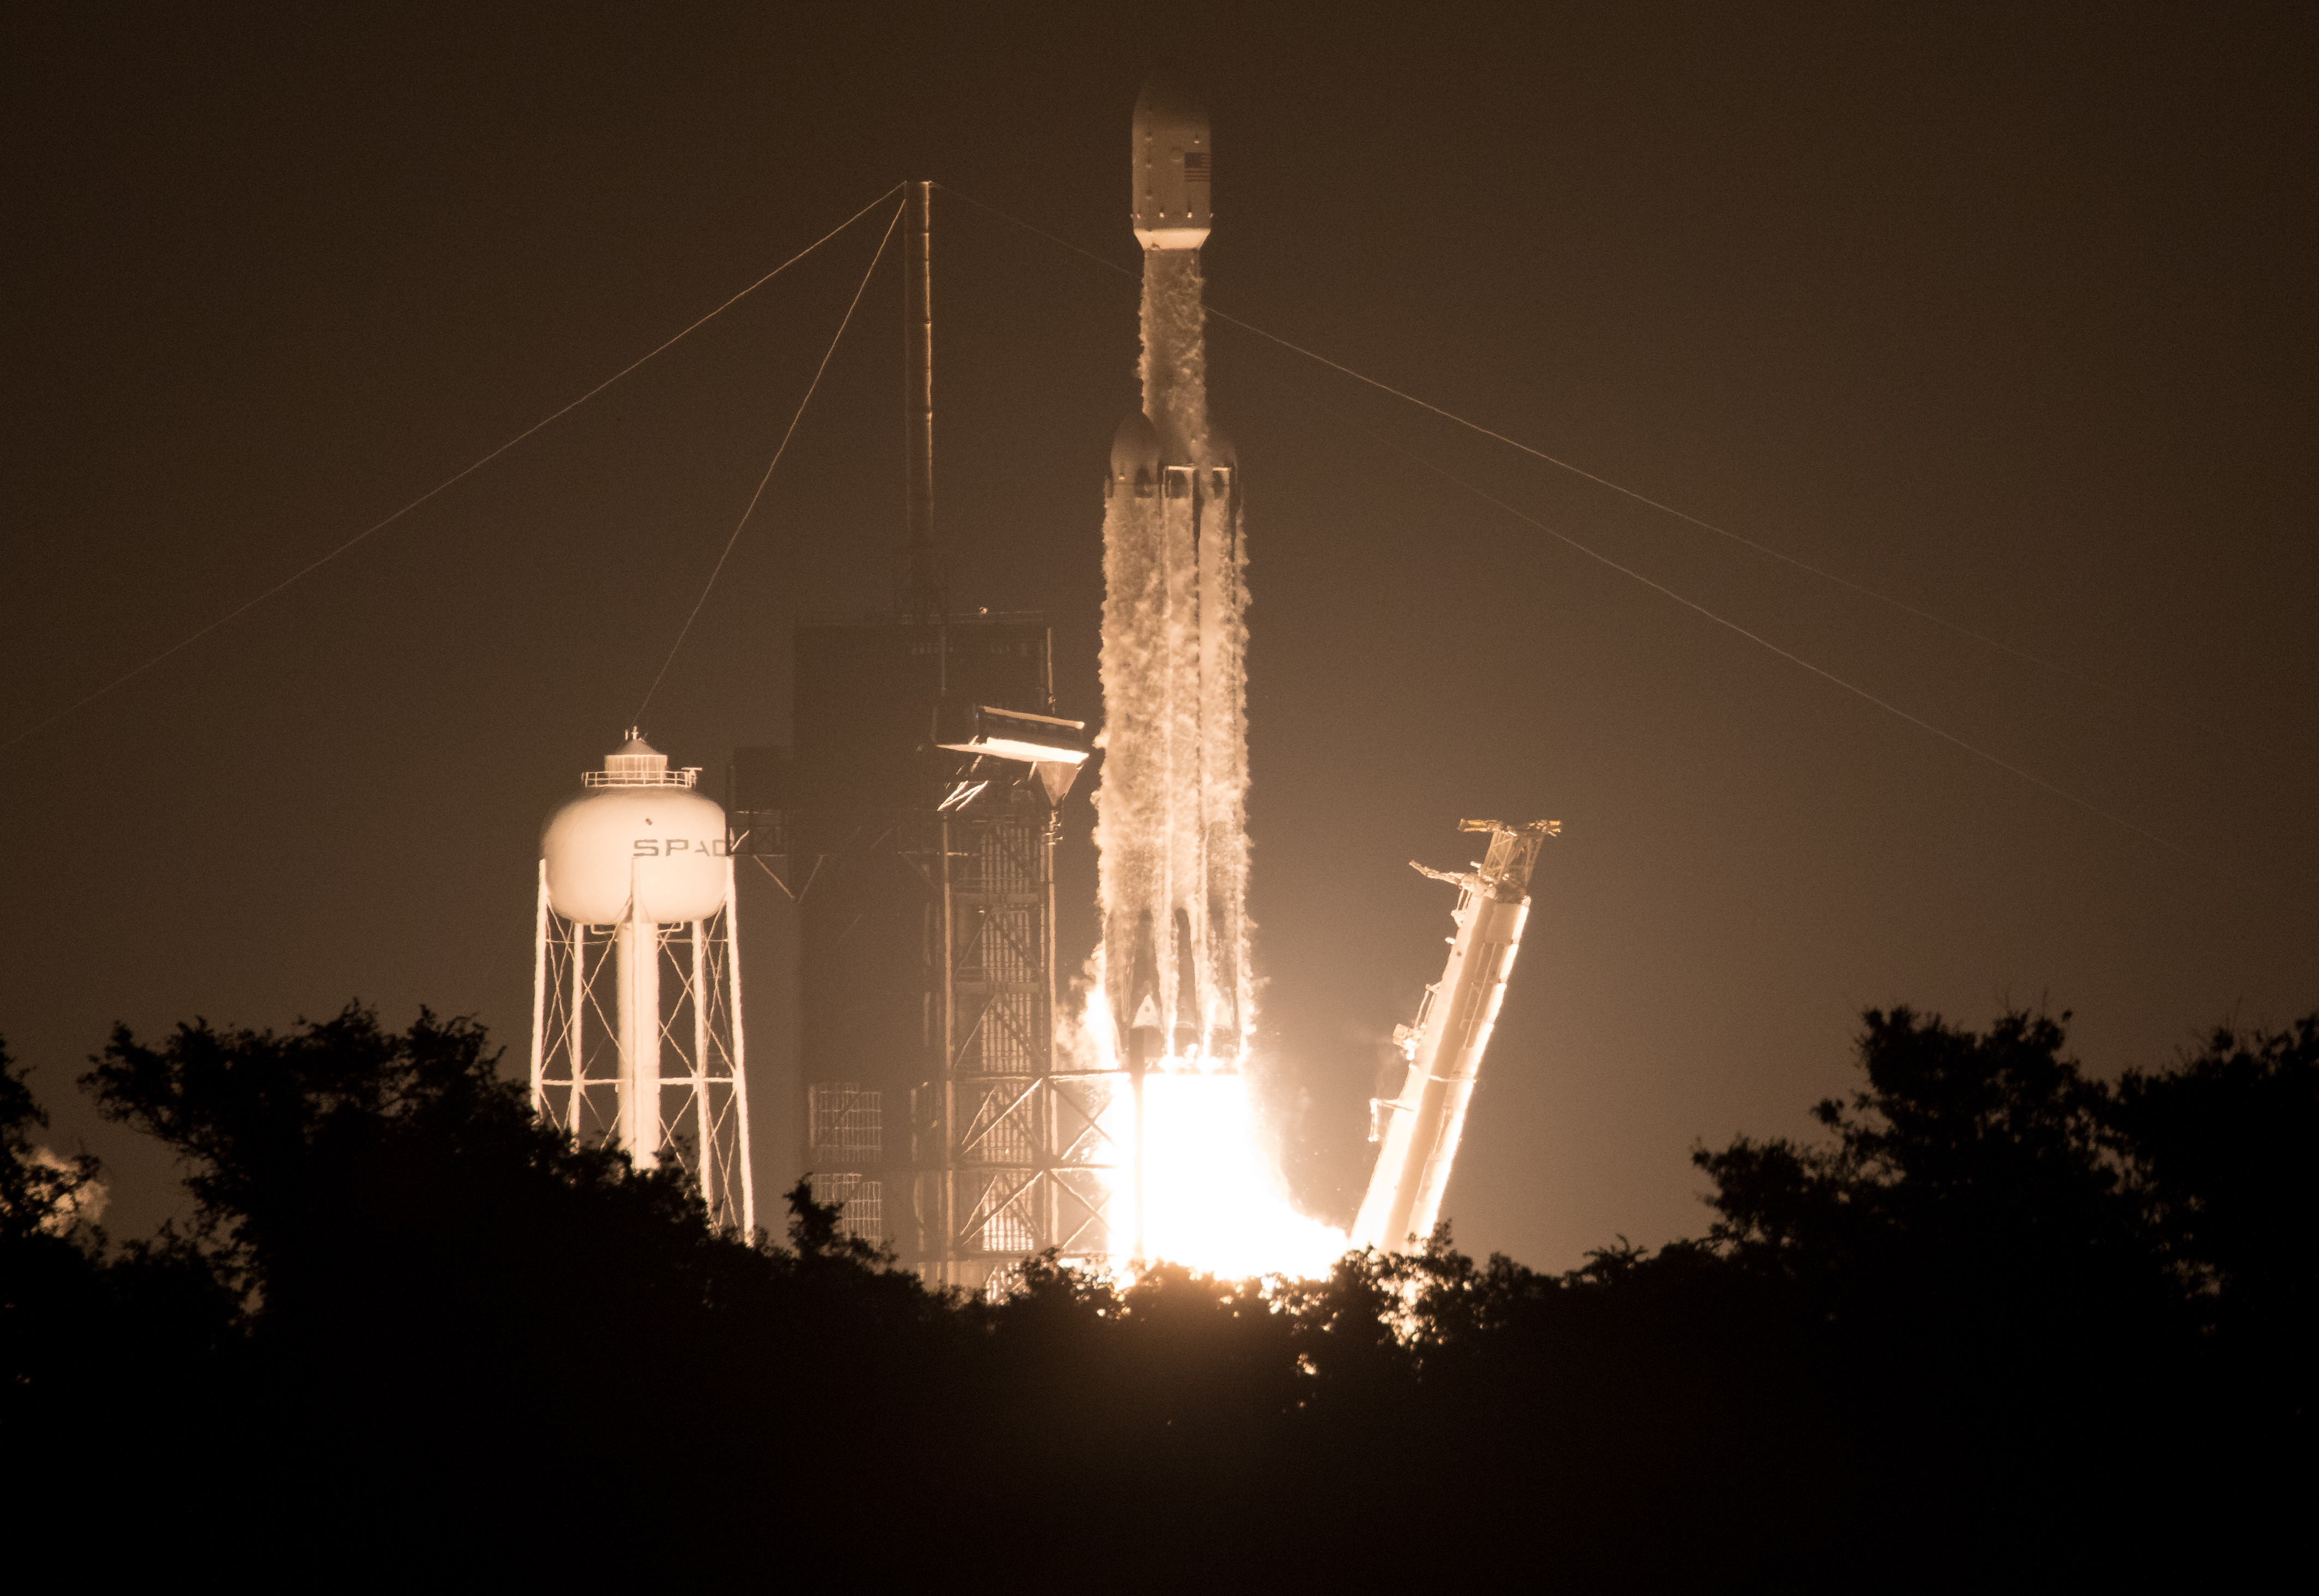 A SpaceX Falcon Heavy rocket carrying 24 satellites as part of the Department of Defense's Space Test Program-2 (STP-2) mission launches from Launch Complex 39A at NASA's Kennedy Space Center in Florida June 25, 2019. The satellites include two AFRL technology and science payloads. (NASA photo/Joel Kowsky)